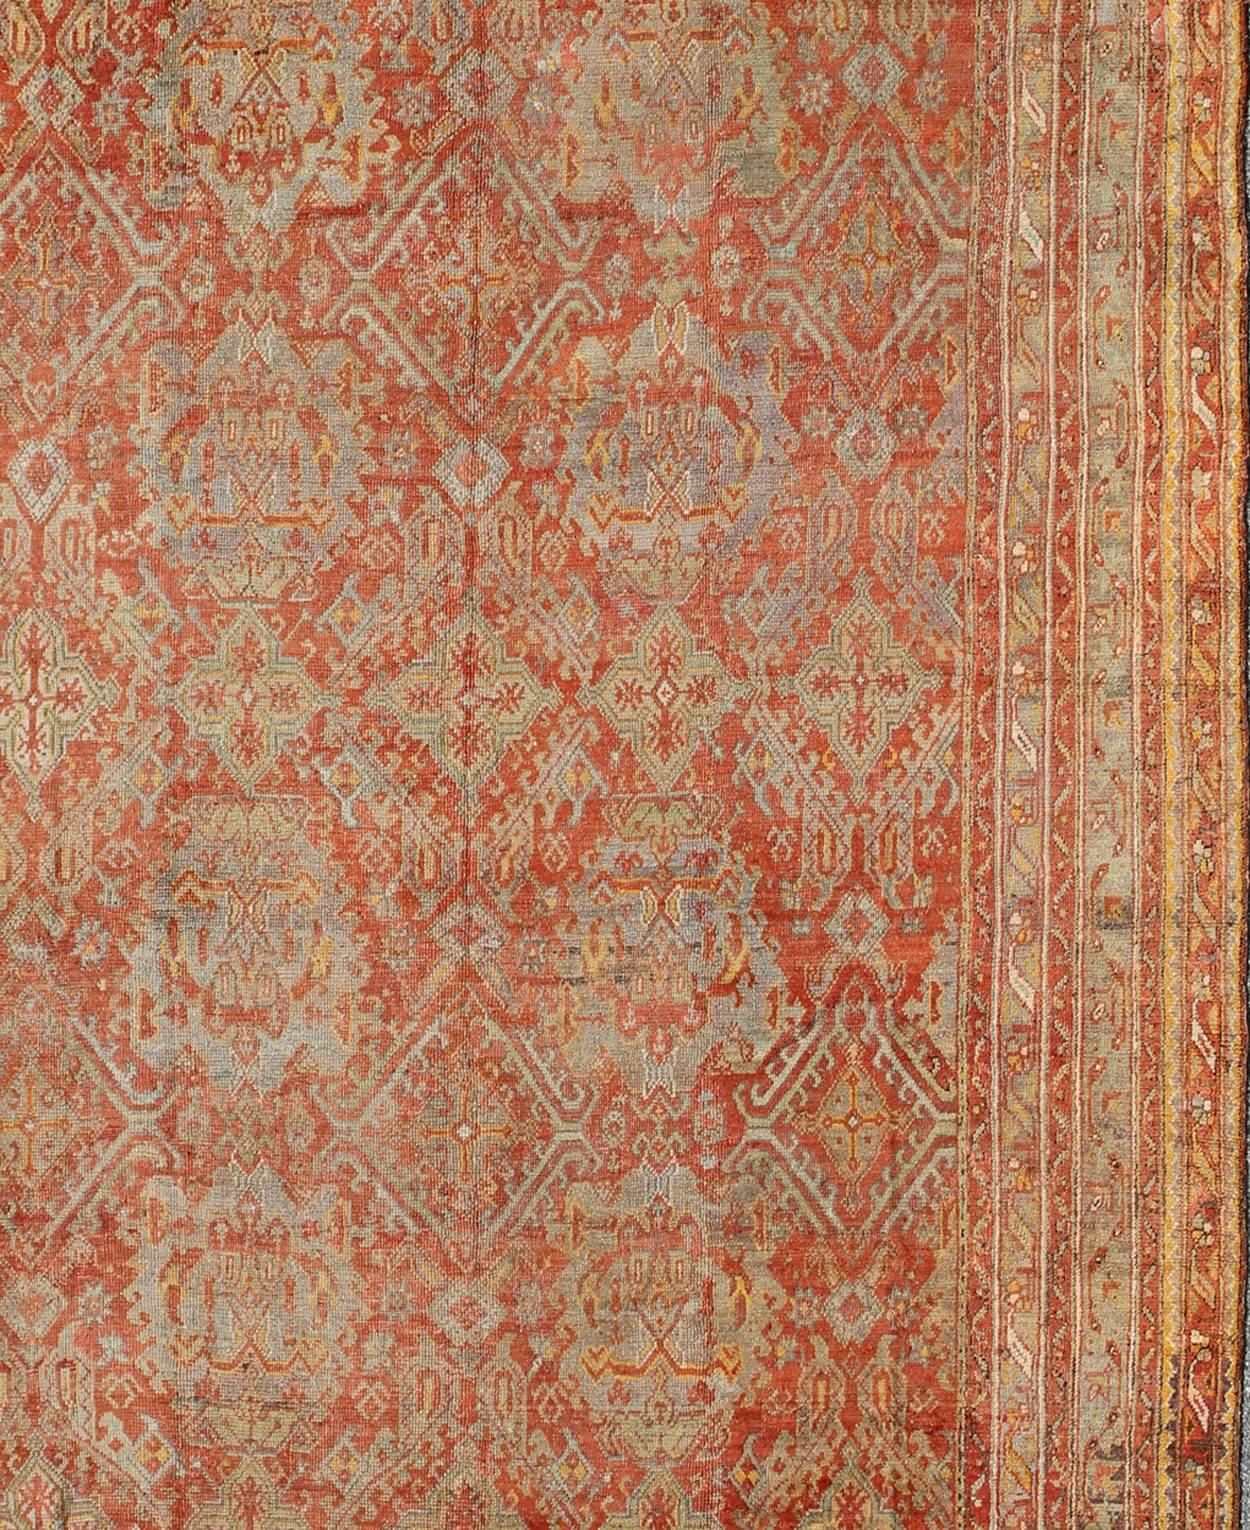 Antique Turkish Oushak Rug with Geometric Design in Soft Red, Light Blue, Yellow In Good Condition For Sale In Atlanta, GA